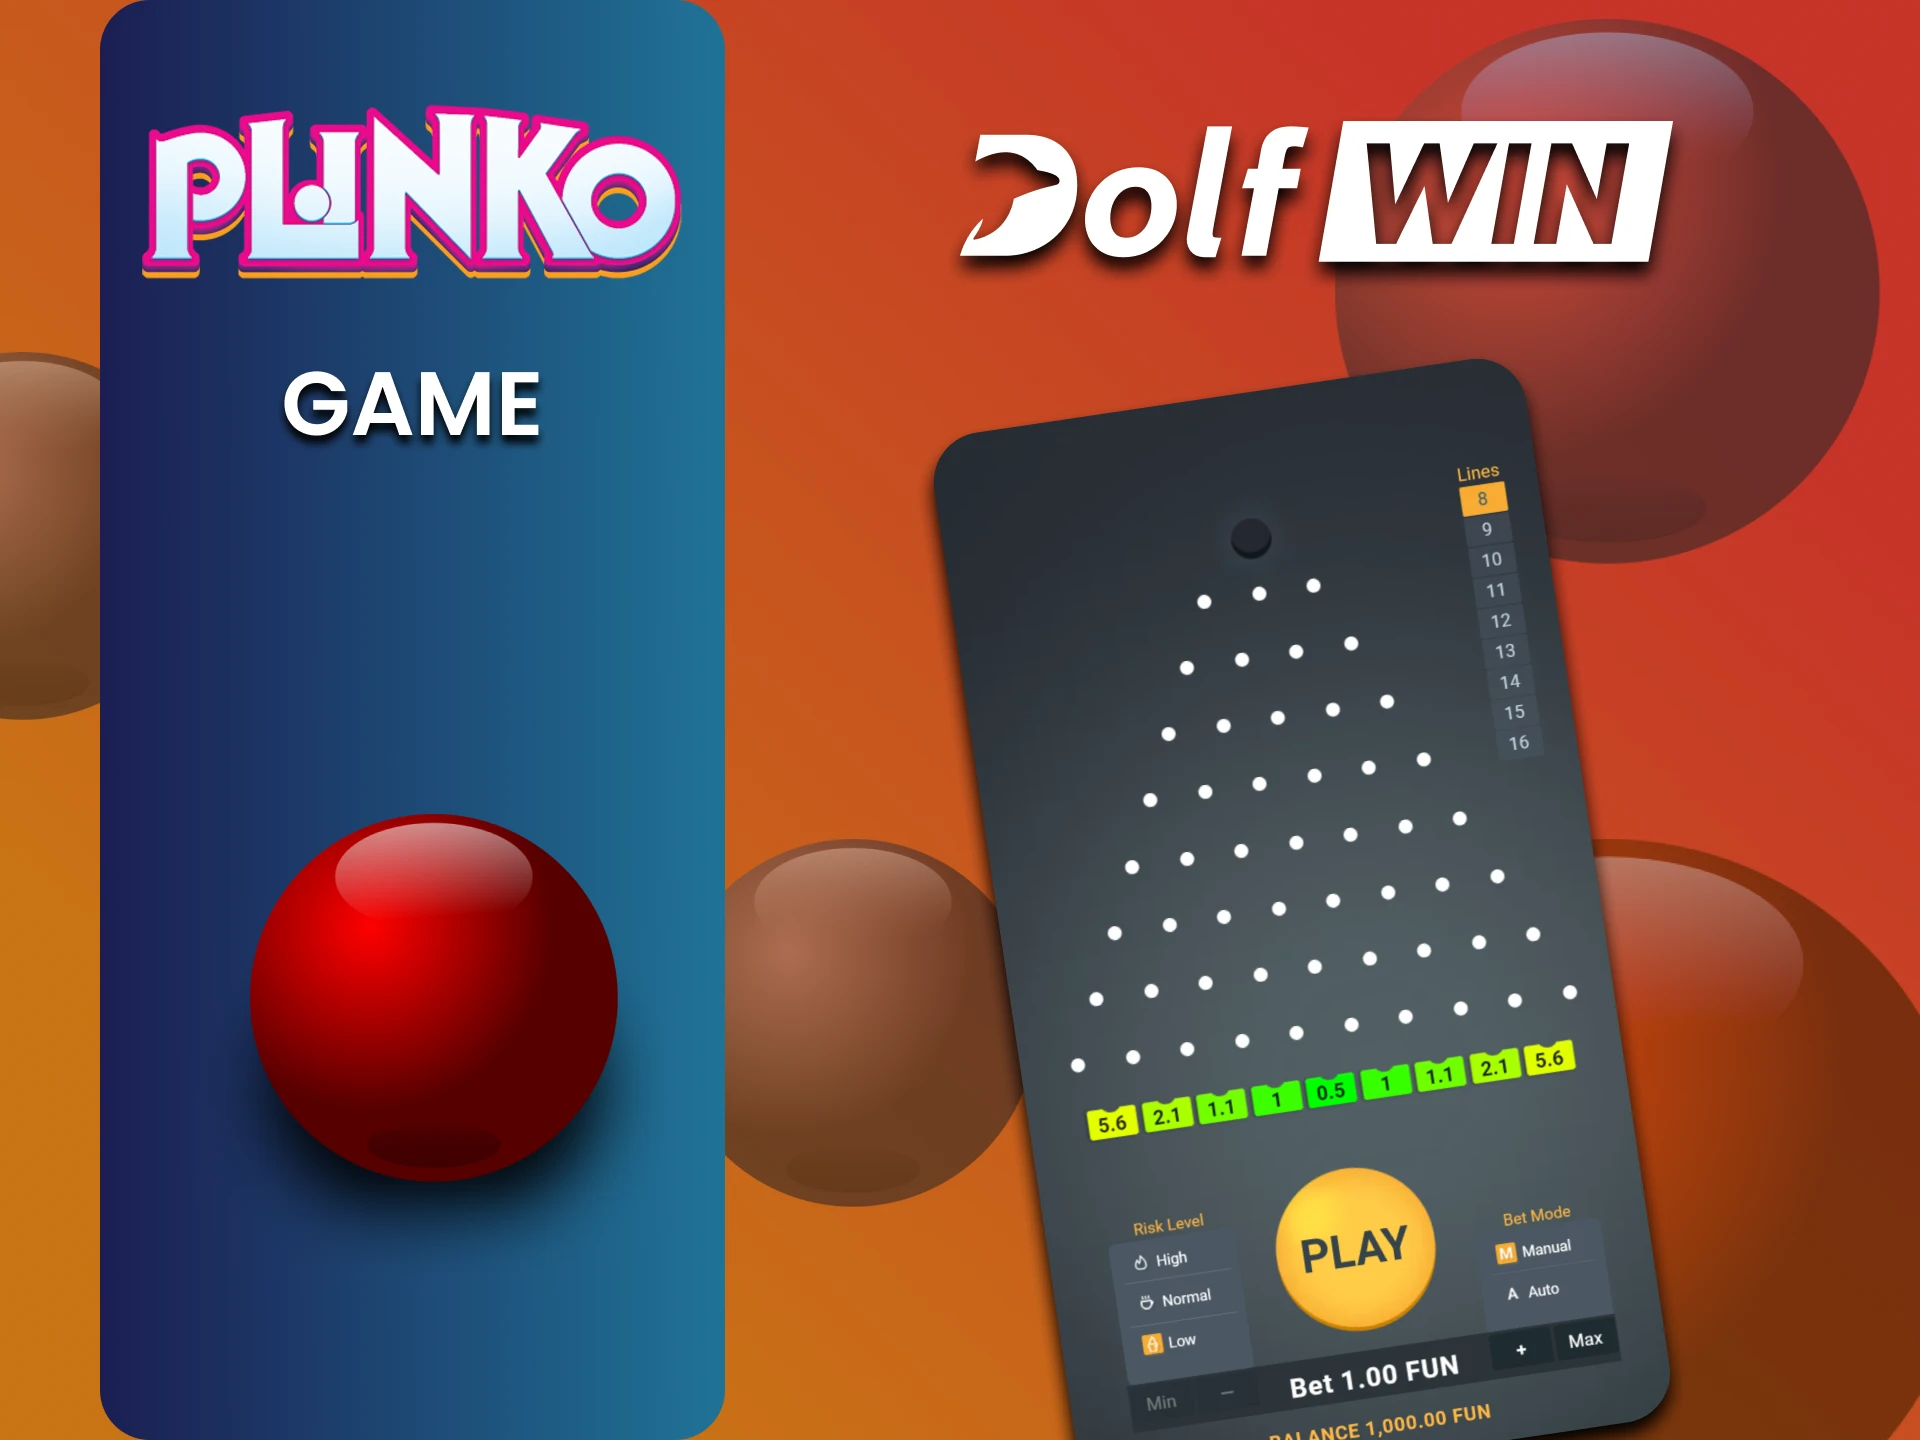 We will tell you everything about the Plinko game on Dolfwin.